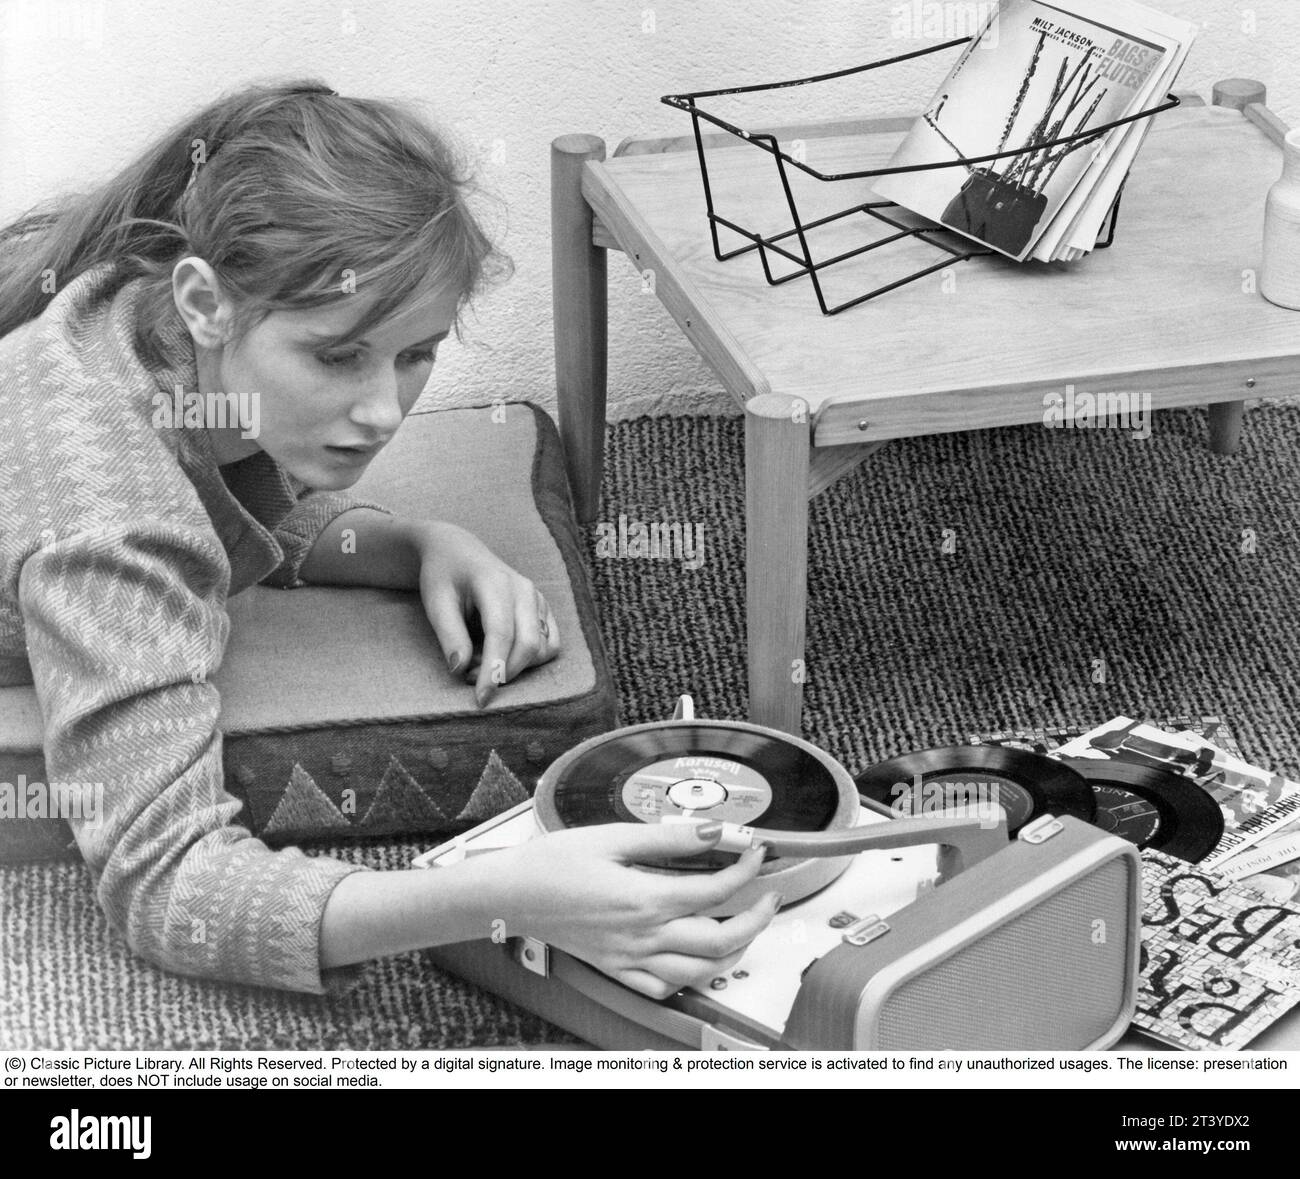 Woman at a gramophone in the 1950s. A typical 1950s teenage girl lying on the floor listening to music from a small gramophone. She is playing the type of records called singles. A record that typically contained a recording of fewer tracks than an LP record. This single record was played at the speed 45 rpm (revolutions per minute) and was 7 inches in diameter, 17,8 cm. The first single record was released 31 march 1949 by RCA Victor. Sweden 1959 Stock Photo